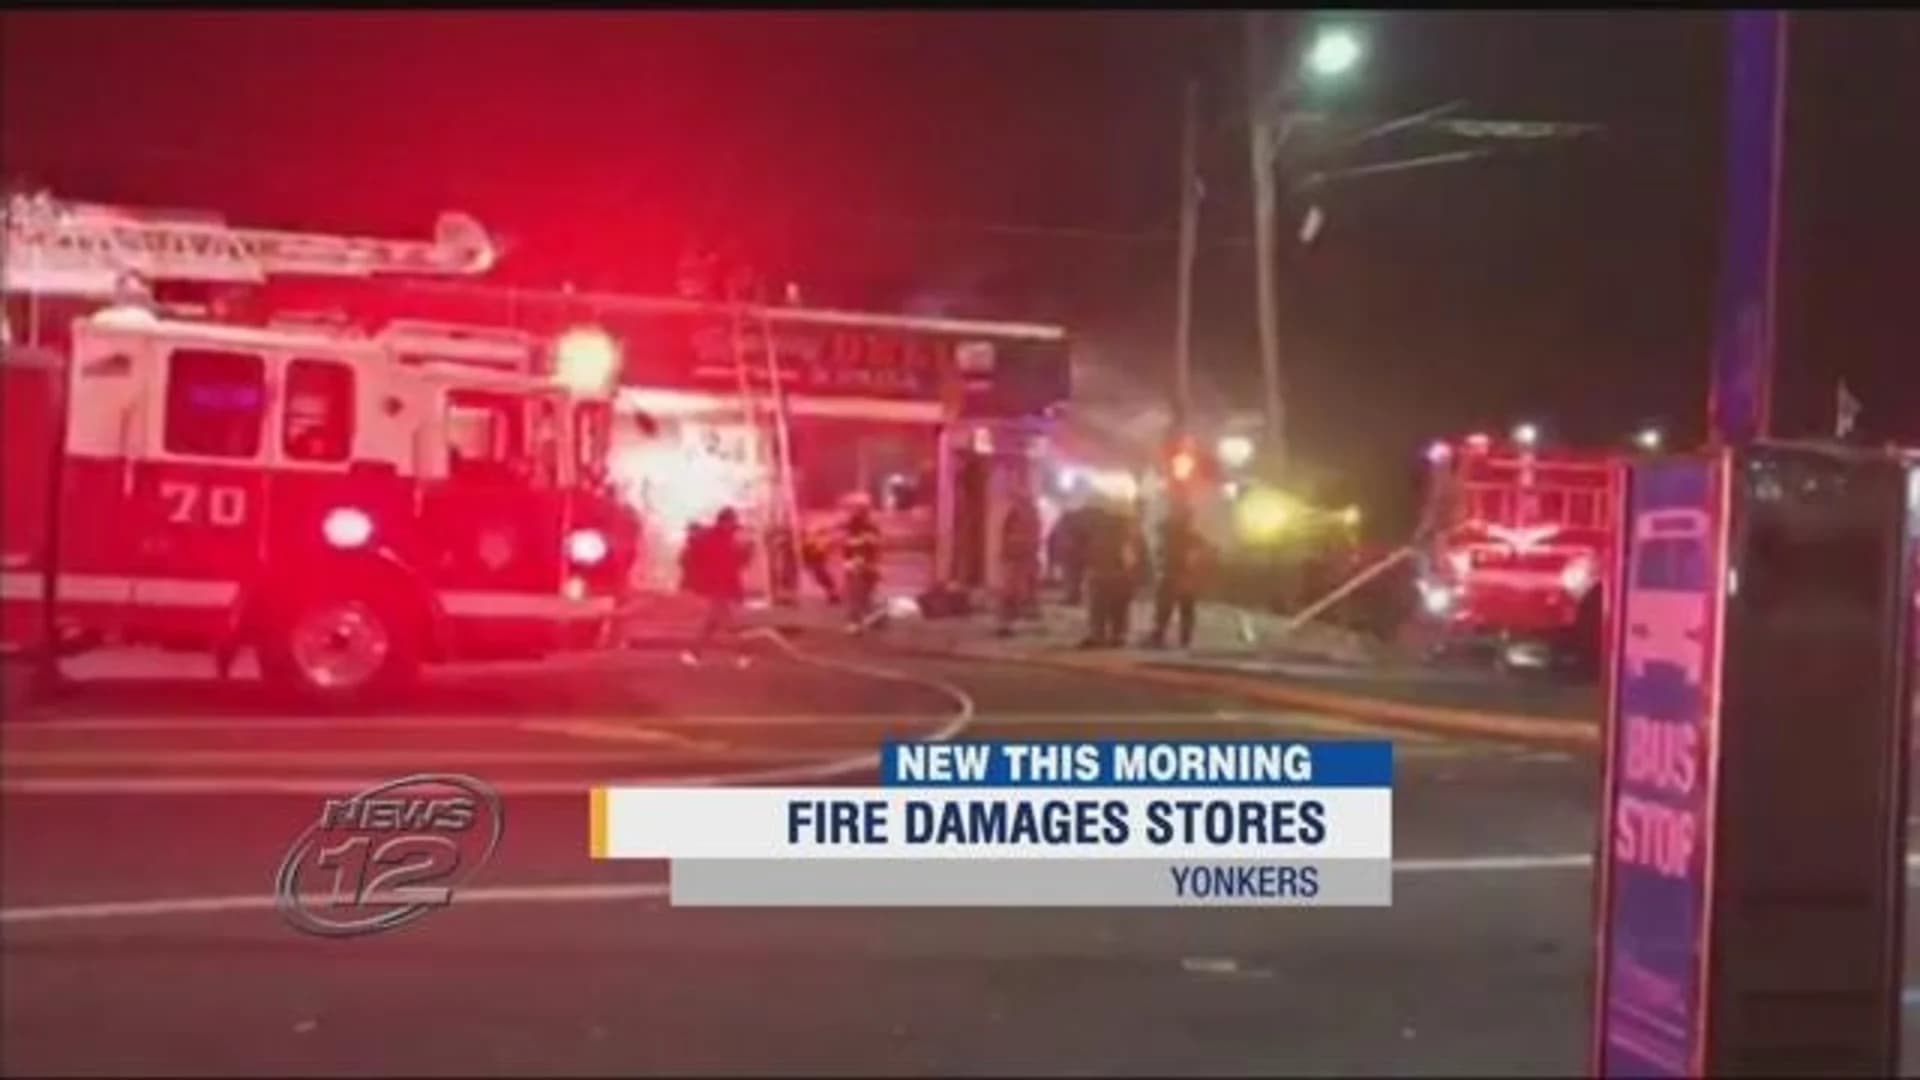 Fire damages businesses in Yonkers